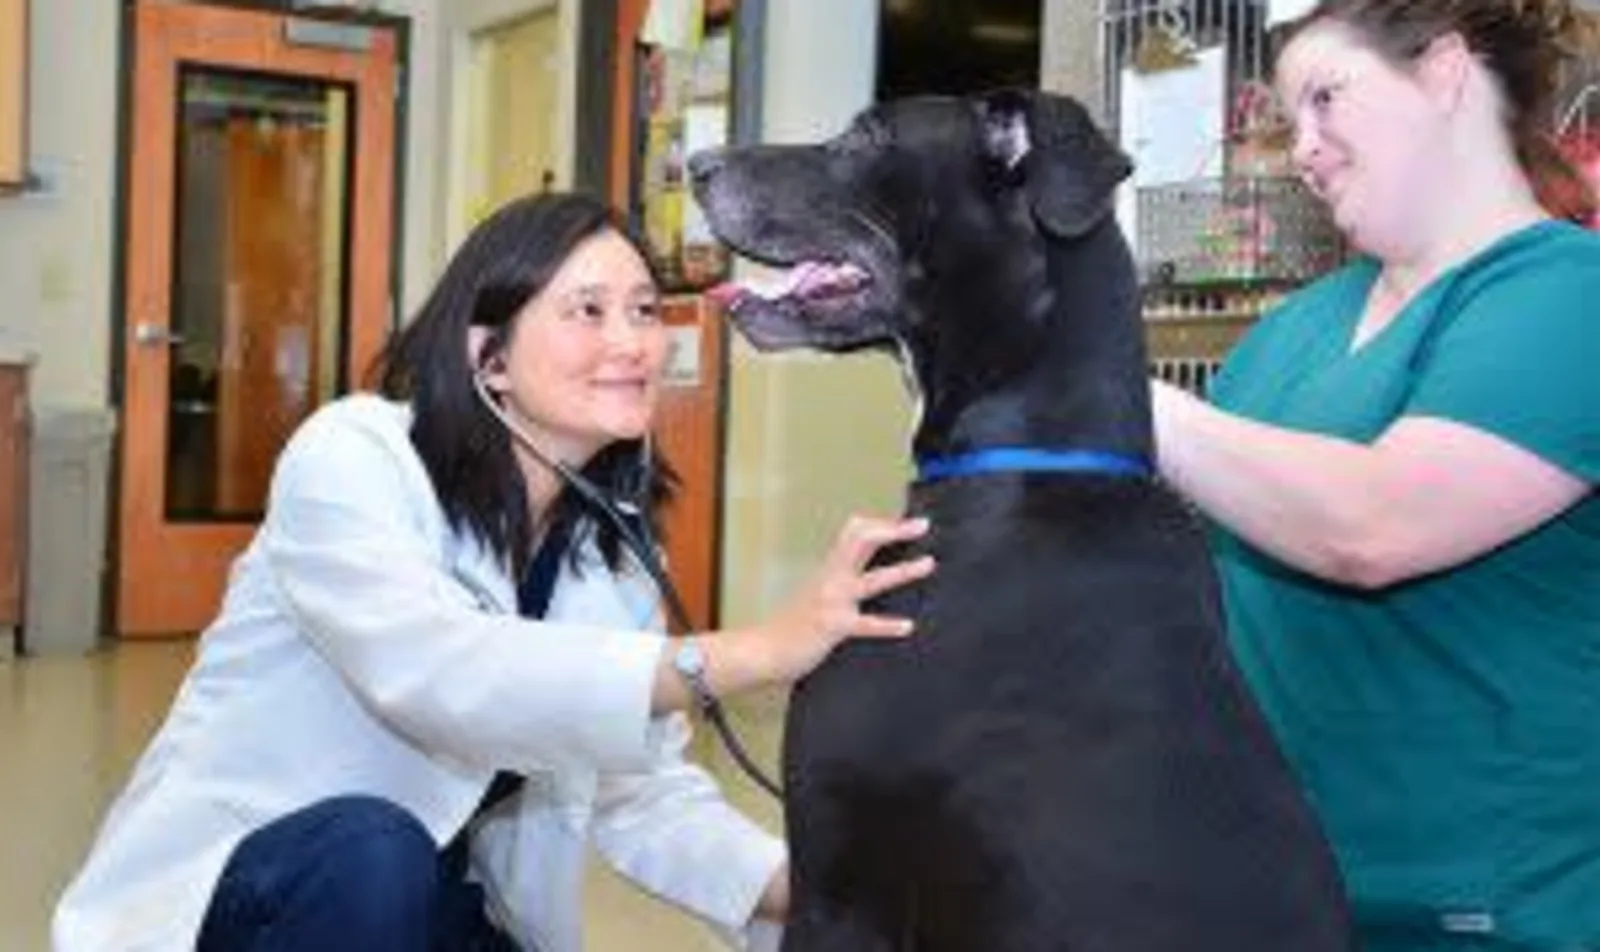 NVS Veterinarian Internist and staff examining a patient